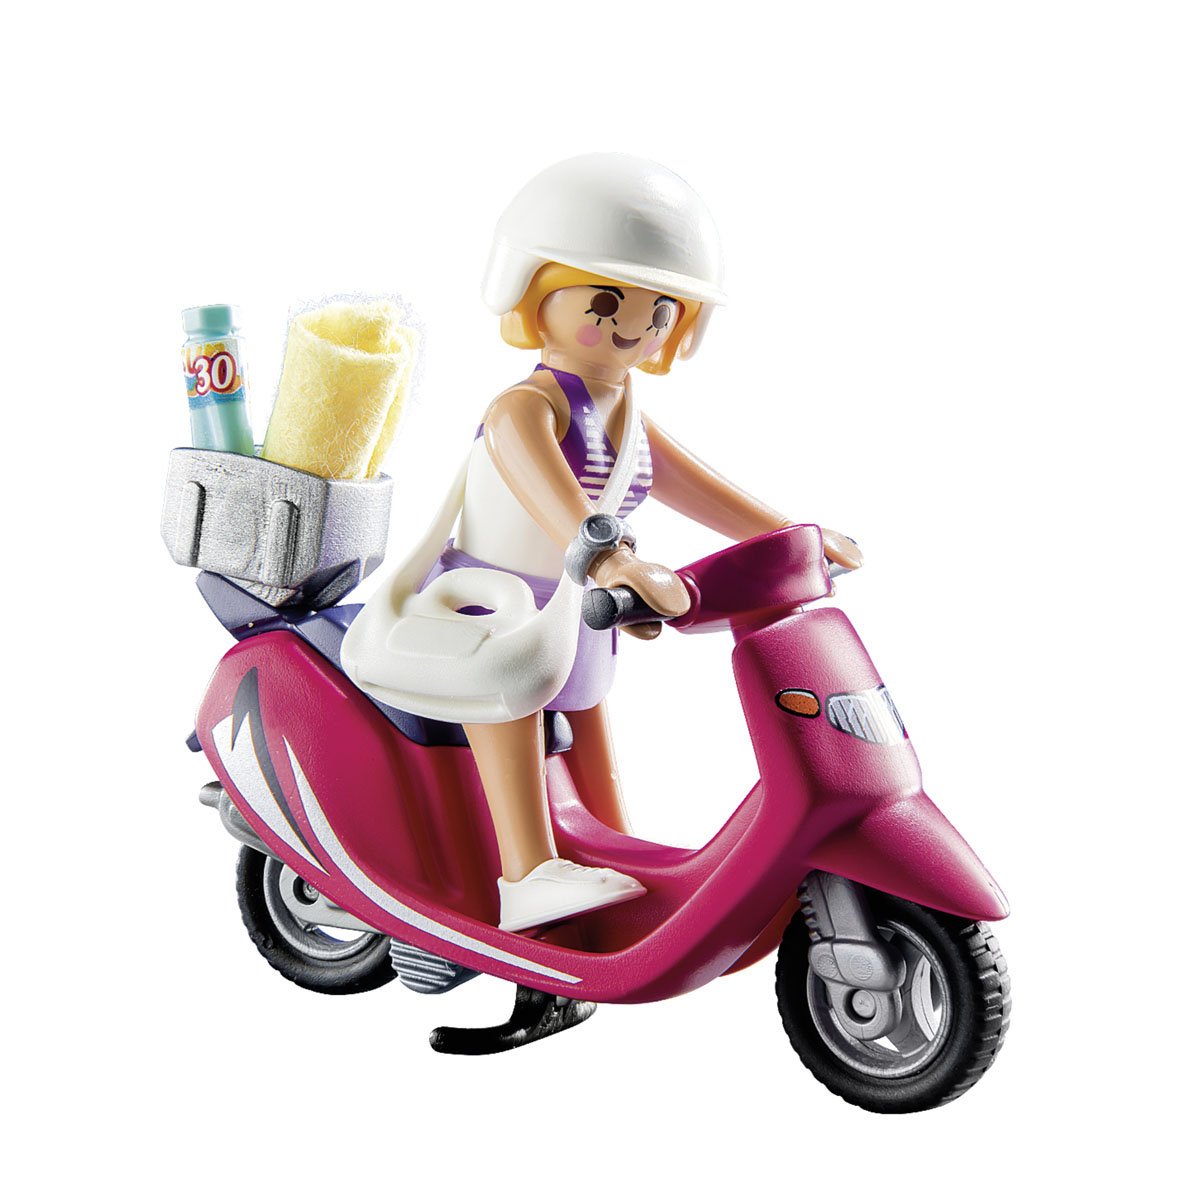 Mujer con Scooter Playmobil